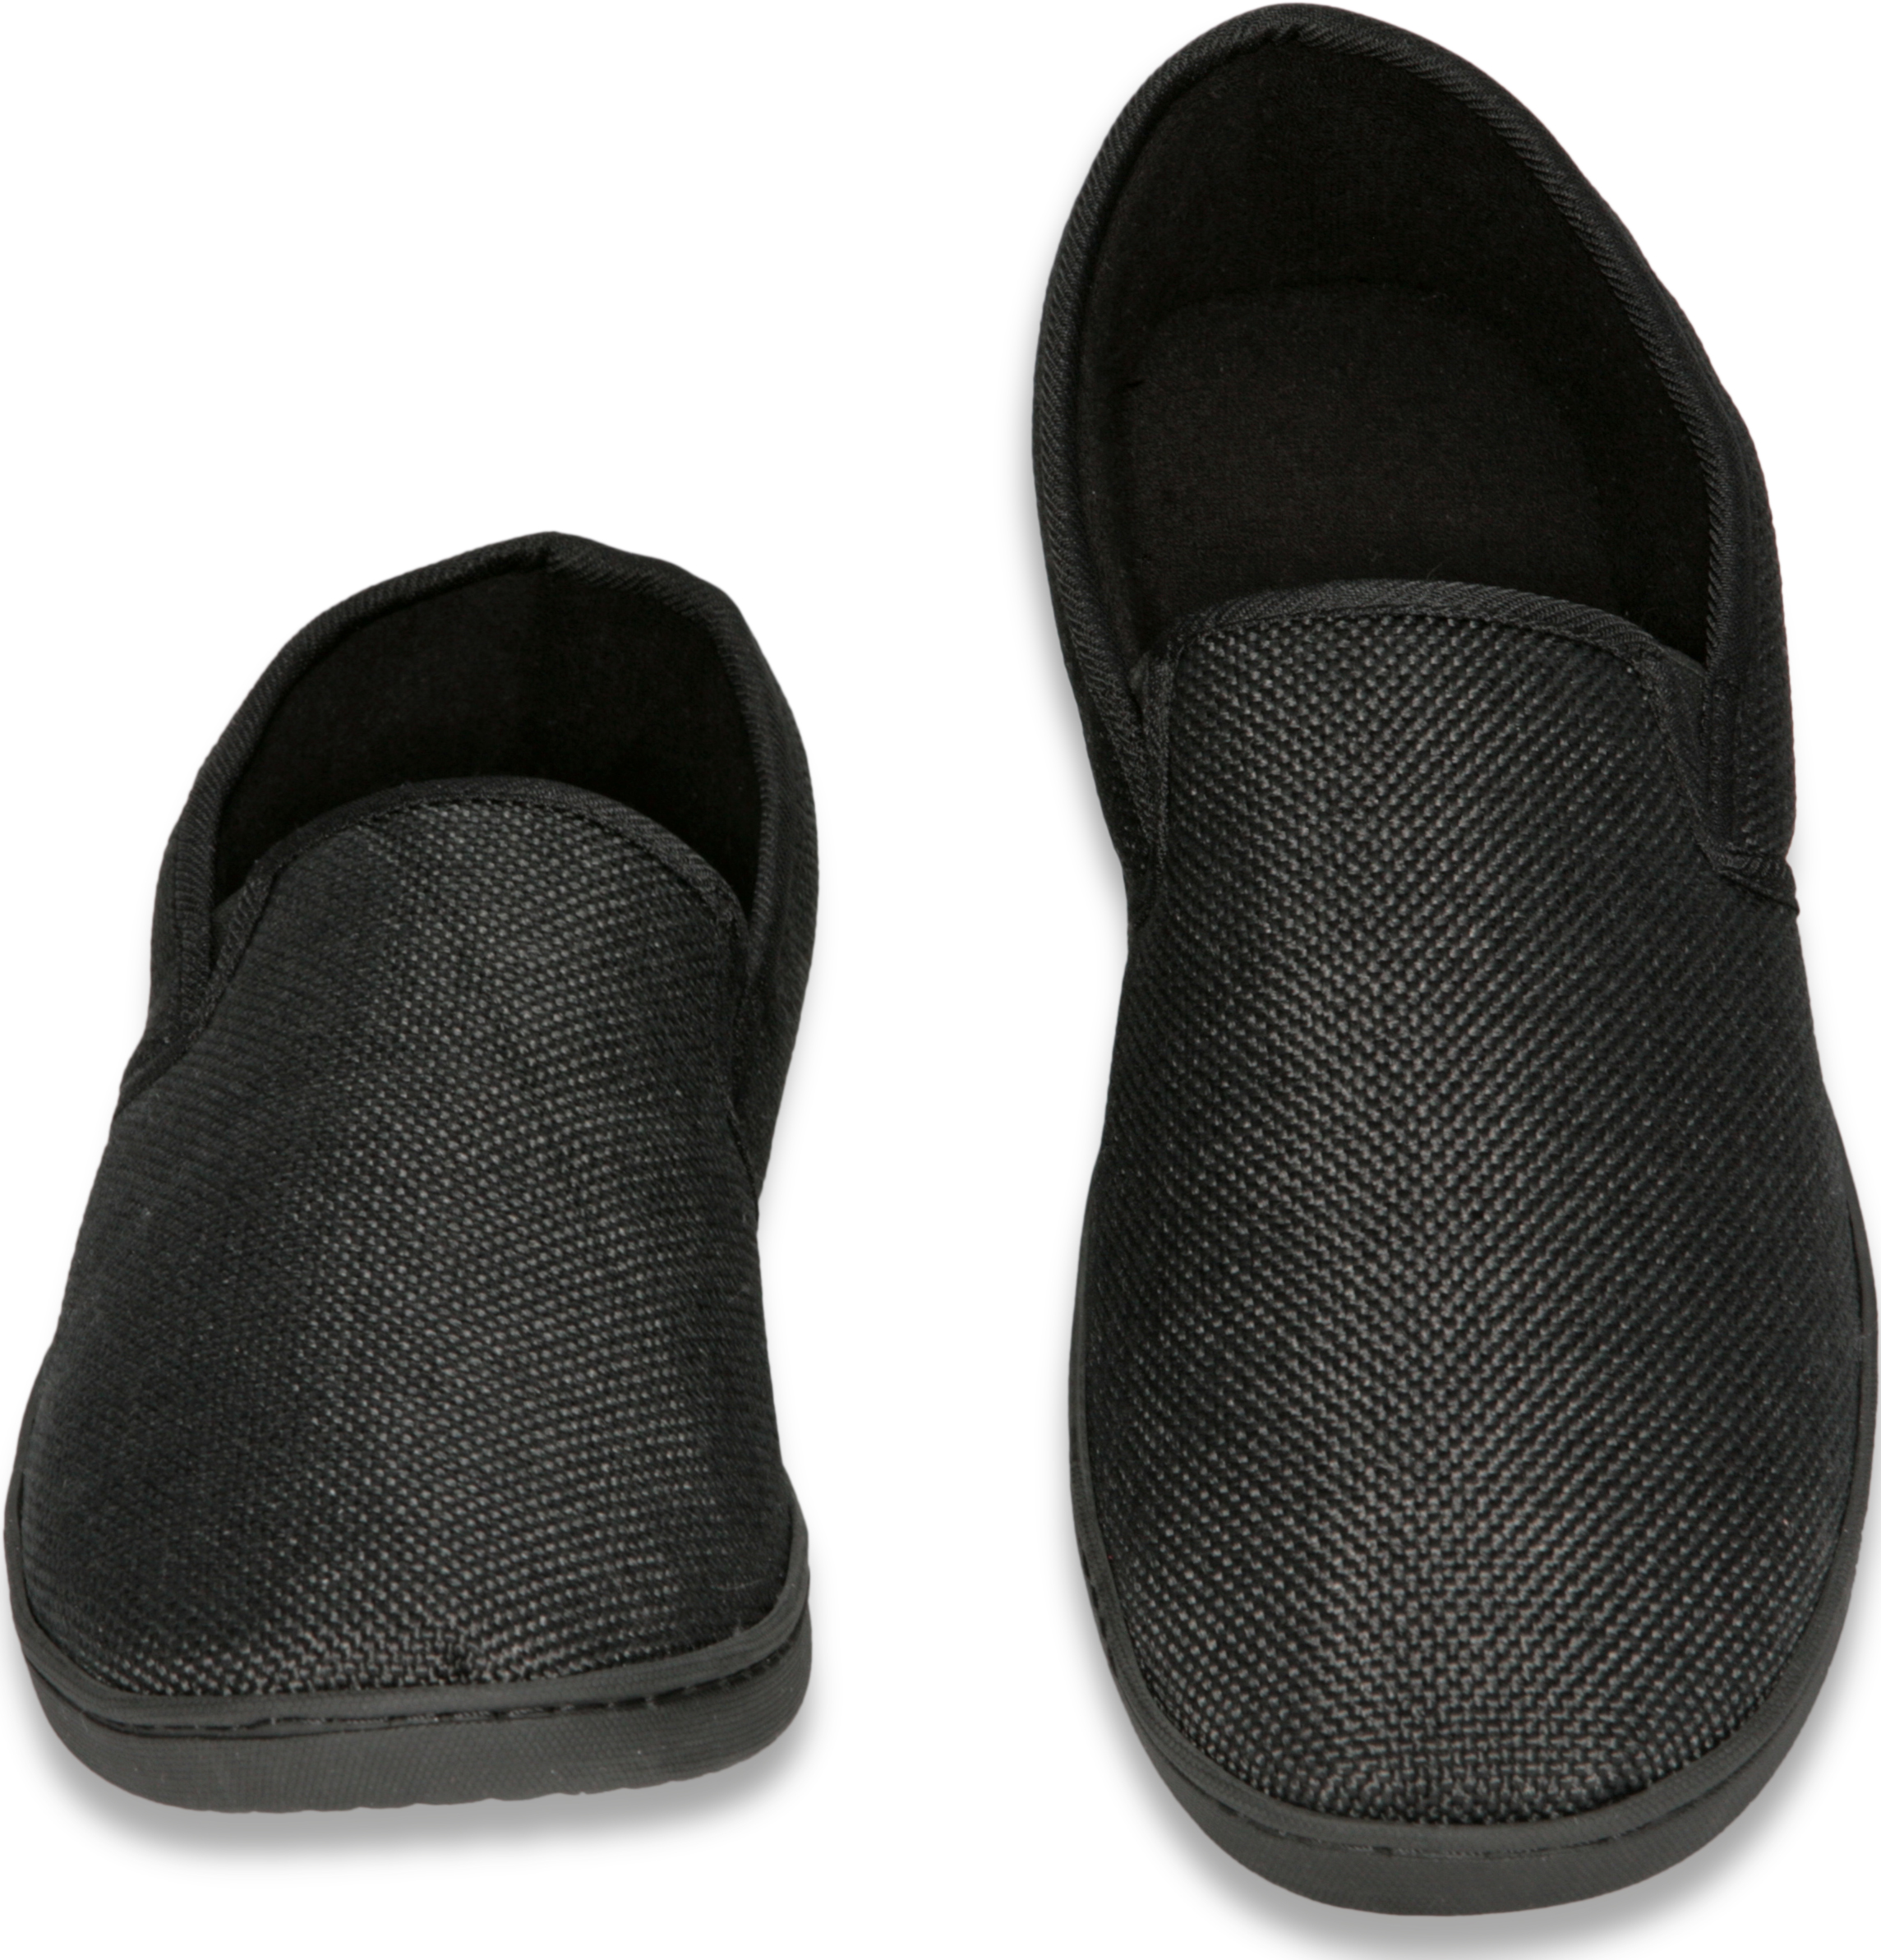 Deluxe Comfort Men's Memory Foam Slipper, Size 9-10 - Suede Vamp Checkered Lining - Memory Foam Insole - Strong TPR Outsole - Mens Slippers, Black - image 2 of 5